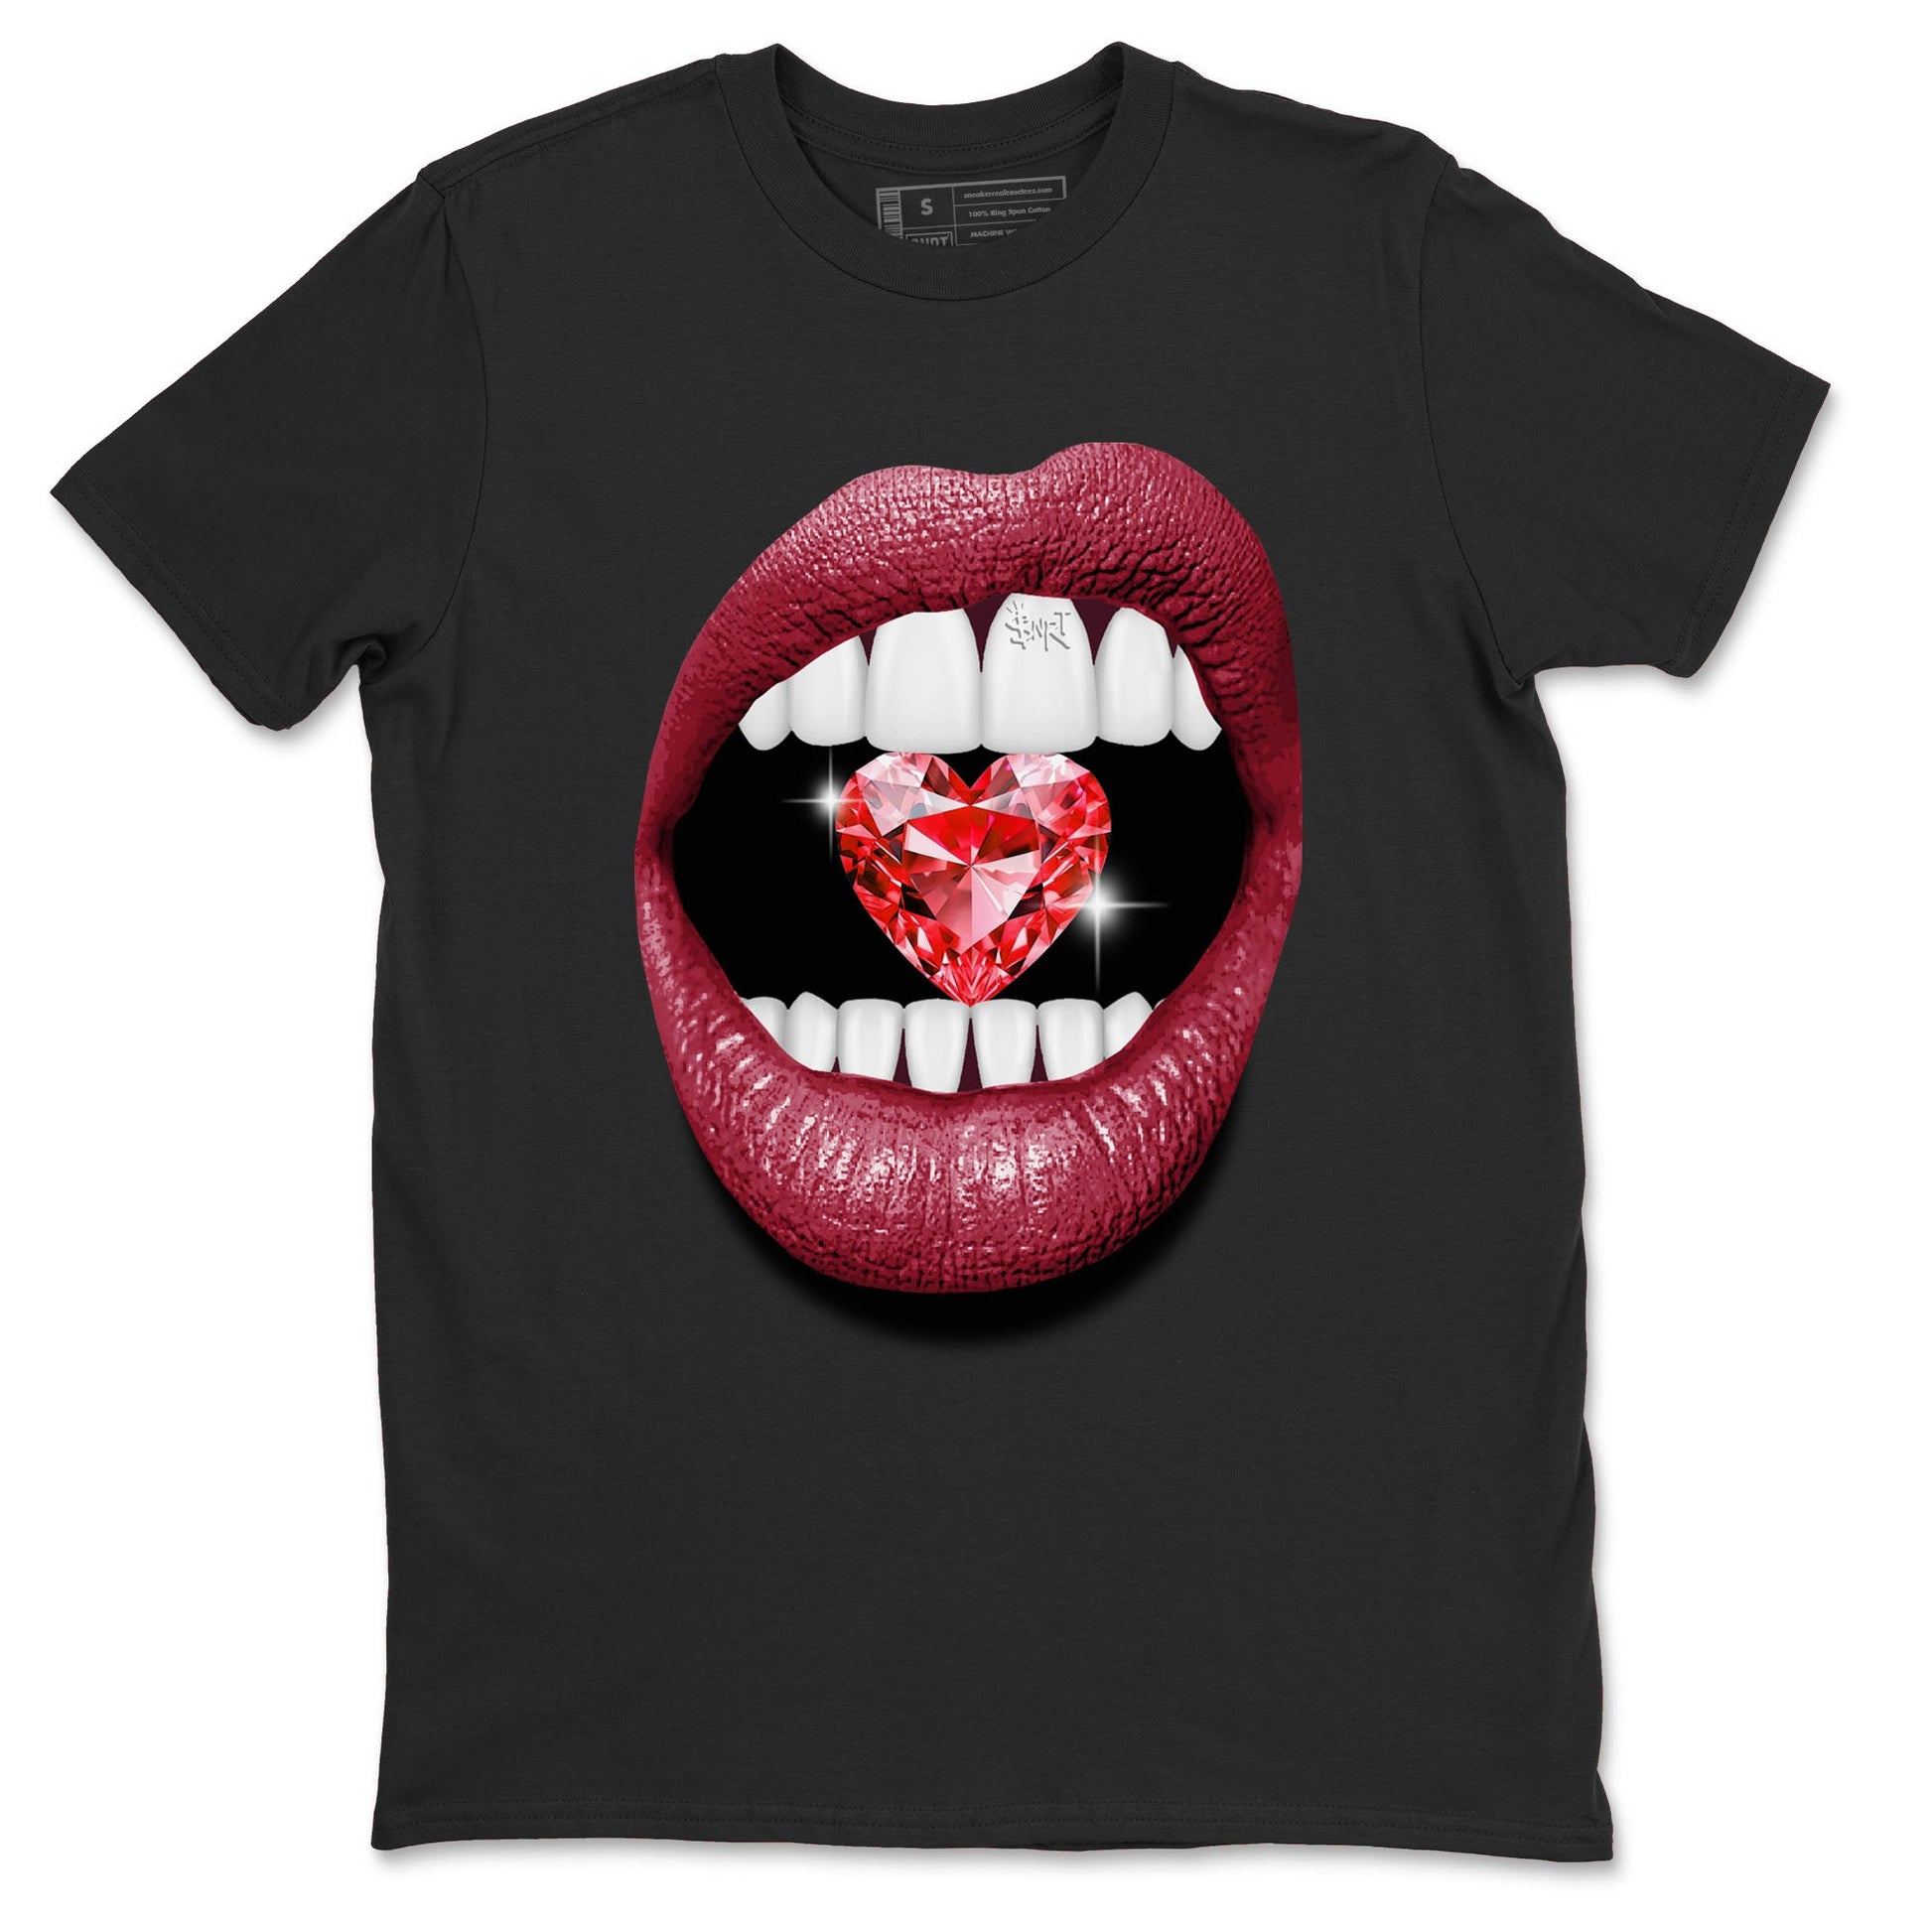 Lips Heart Diamond sneaker match tees to Special Valentine's Day street fashion brand for shirts to match Jordans SNRT Sneaker Tees Air Force 1 Valentines Day unisex t-shirt Black 2 unisex shirt